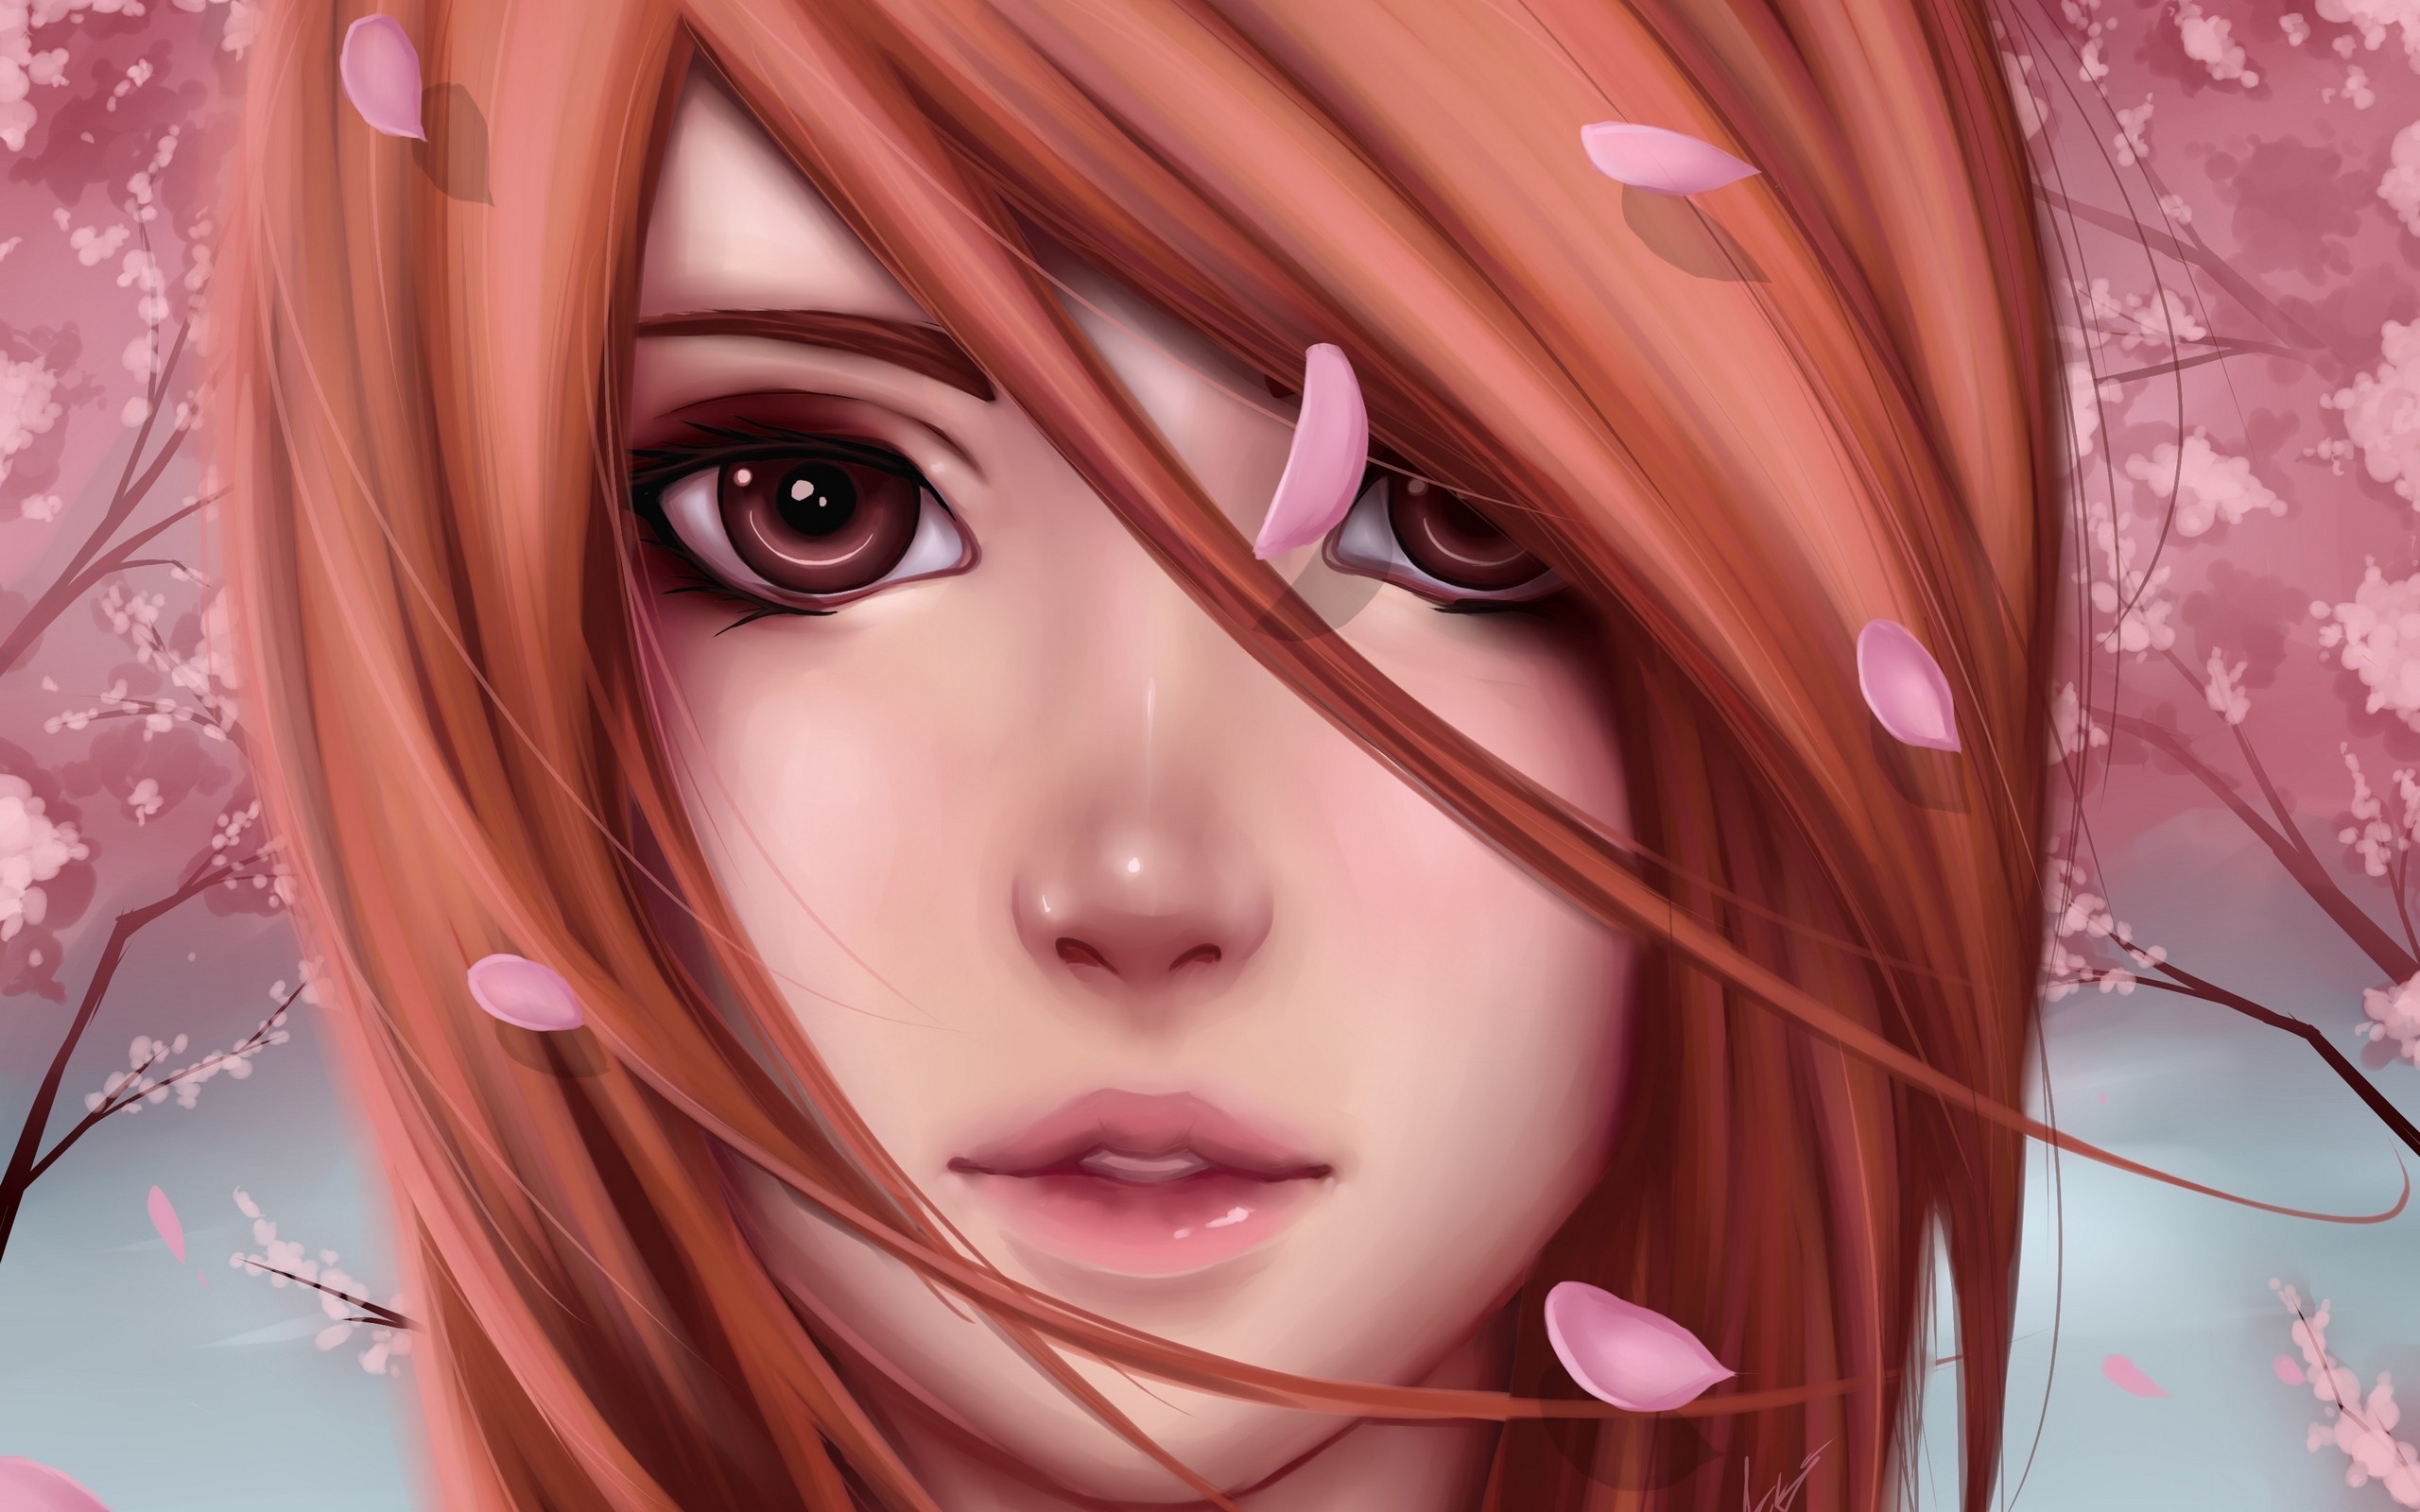 General 2560x1600 redhead face cherry blossom women hair in face portrait closeup looking at viewer artwork